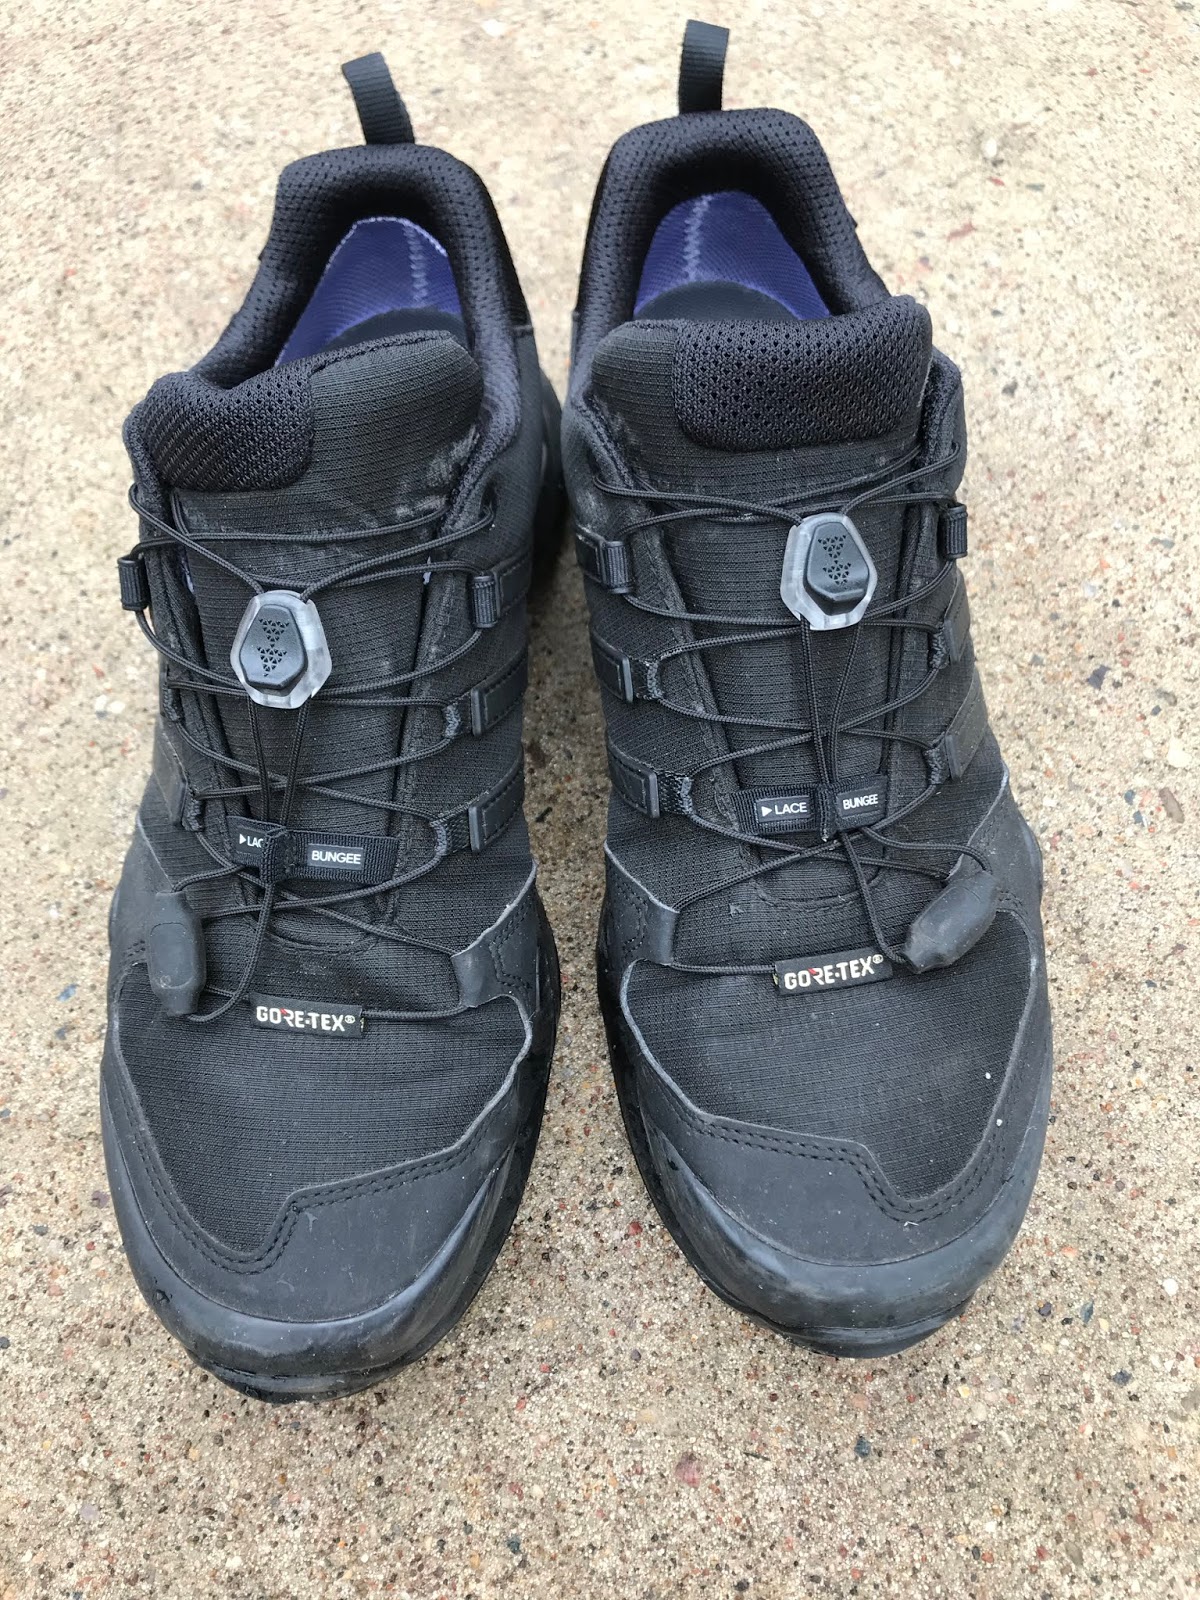 adidas Terex Swift R2 GTX Initial Review - DOCTORS OF RUNNING